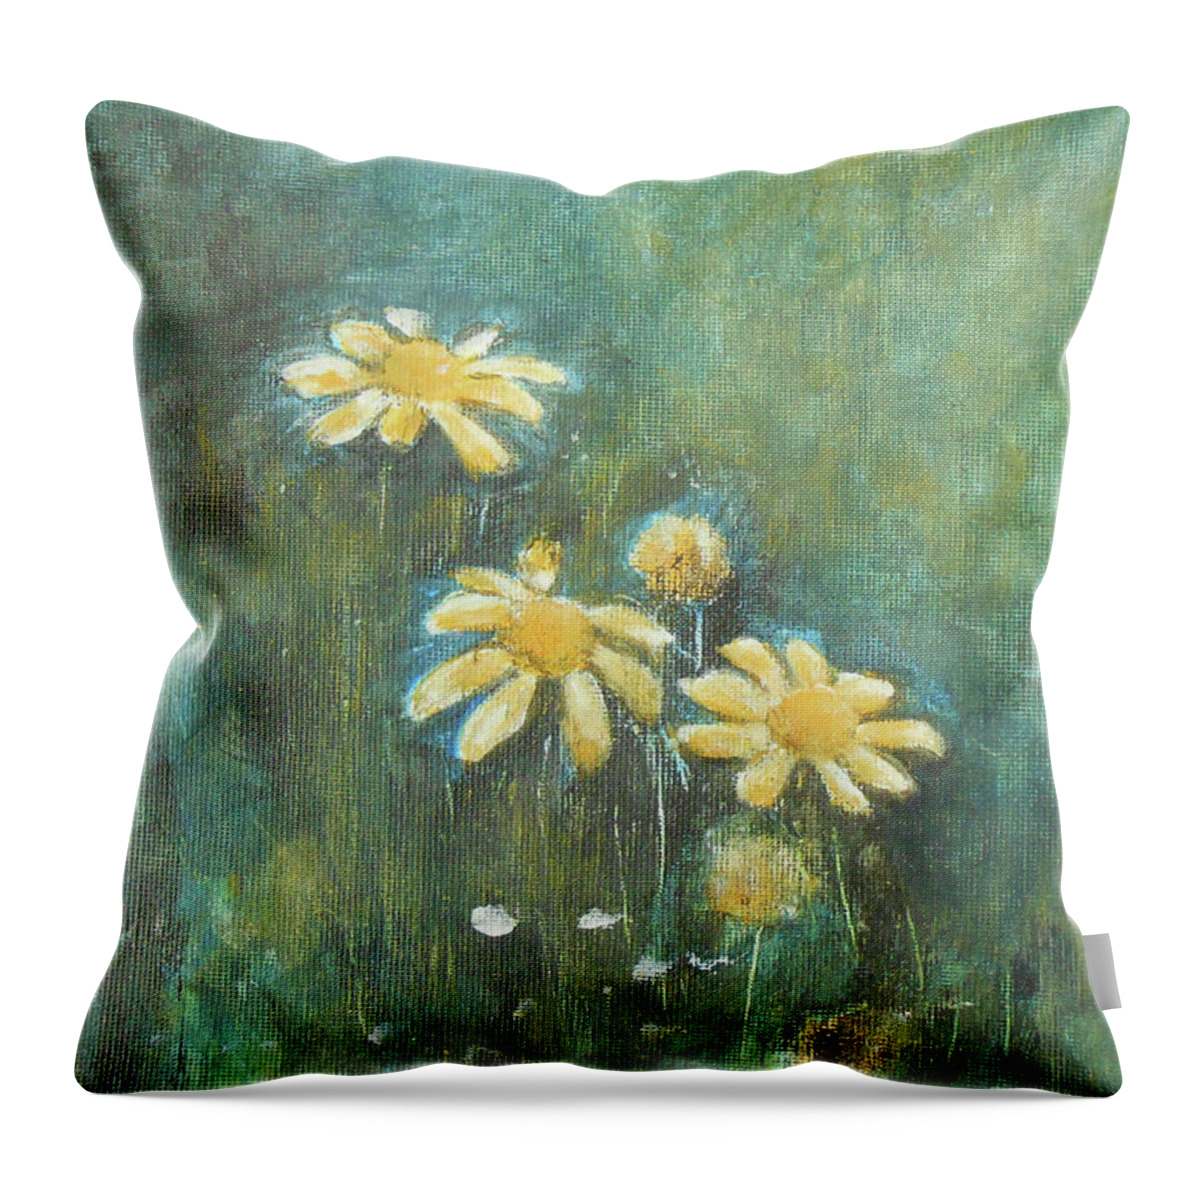 Floral Throw Pillow featuring the painting Daisies 3 by Jane See